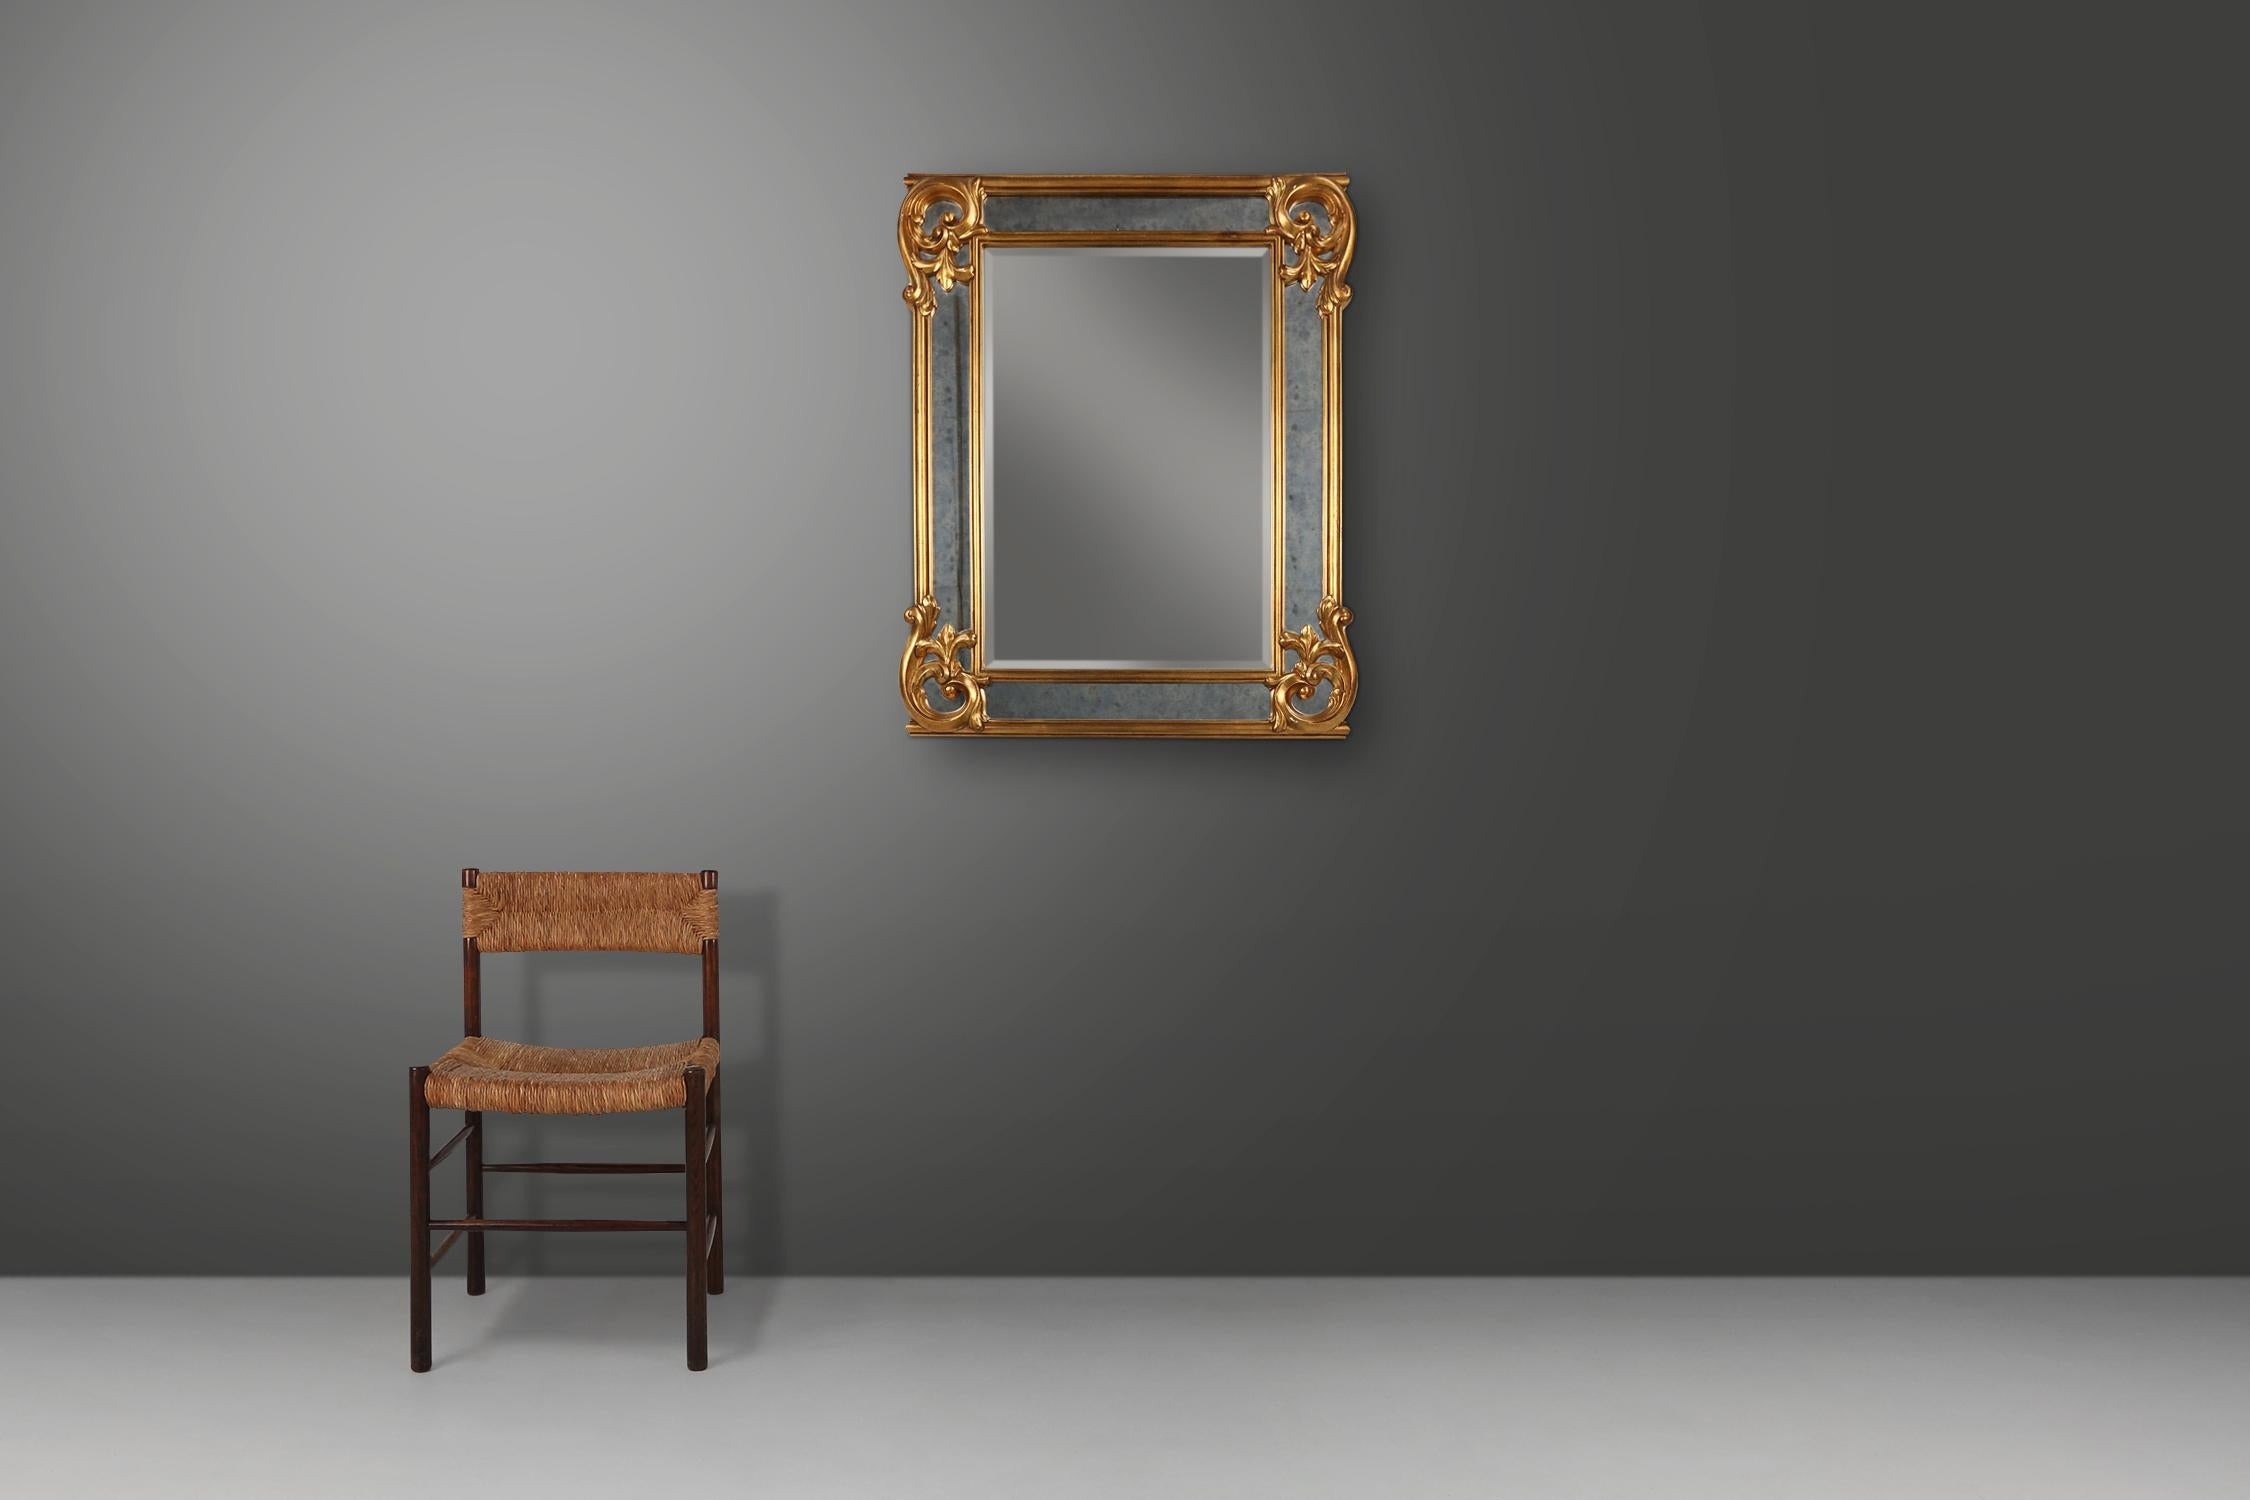 Belgium / 1950 / mirror / resin, mirror and smoked glass mirror glass / mid-century / vintage

Baroque style large wall mirror with extra wide frame, made in Belgium in the 1950s. This stunning piece can be hung in a portrait and landschap